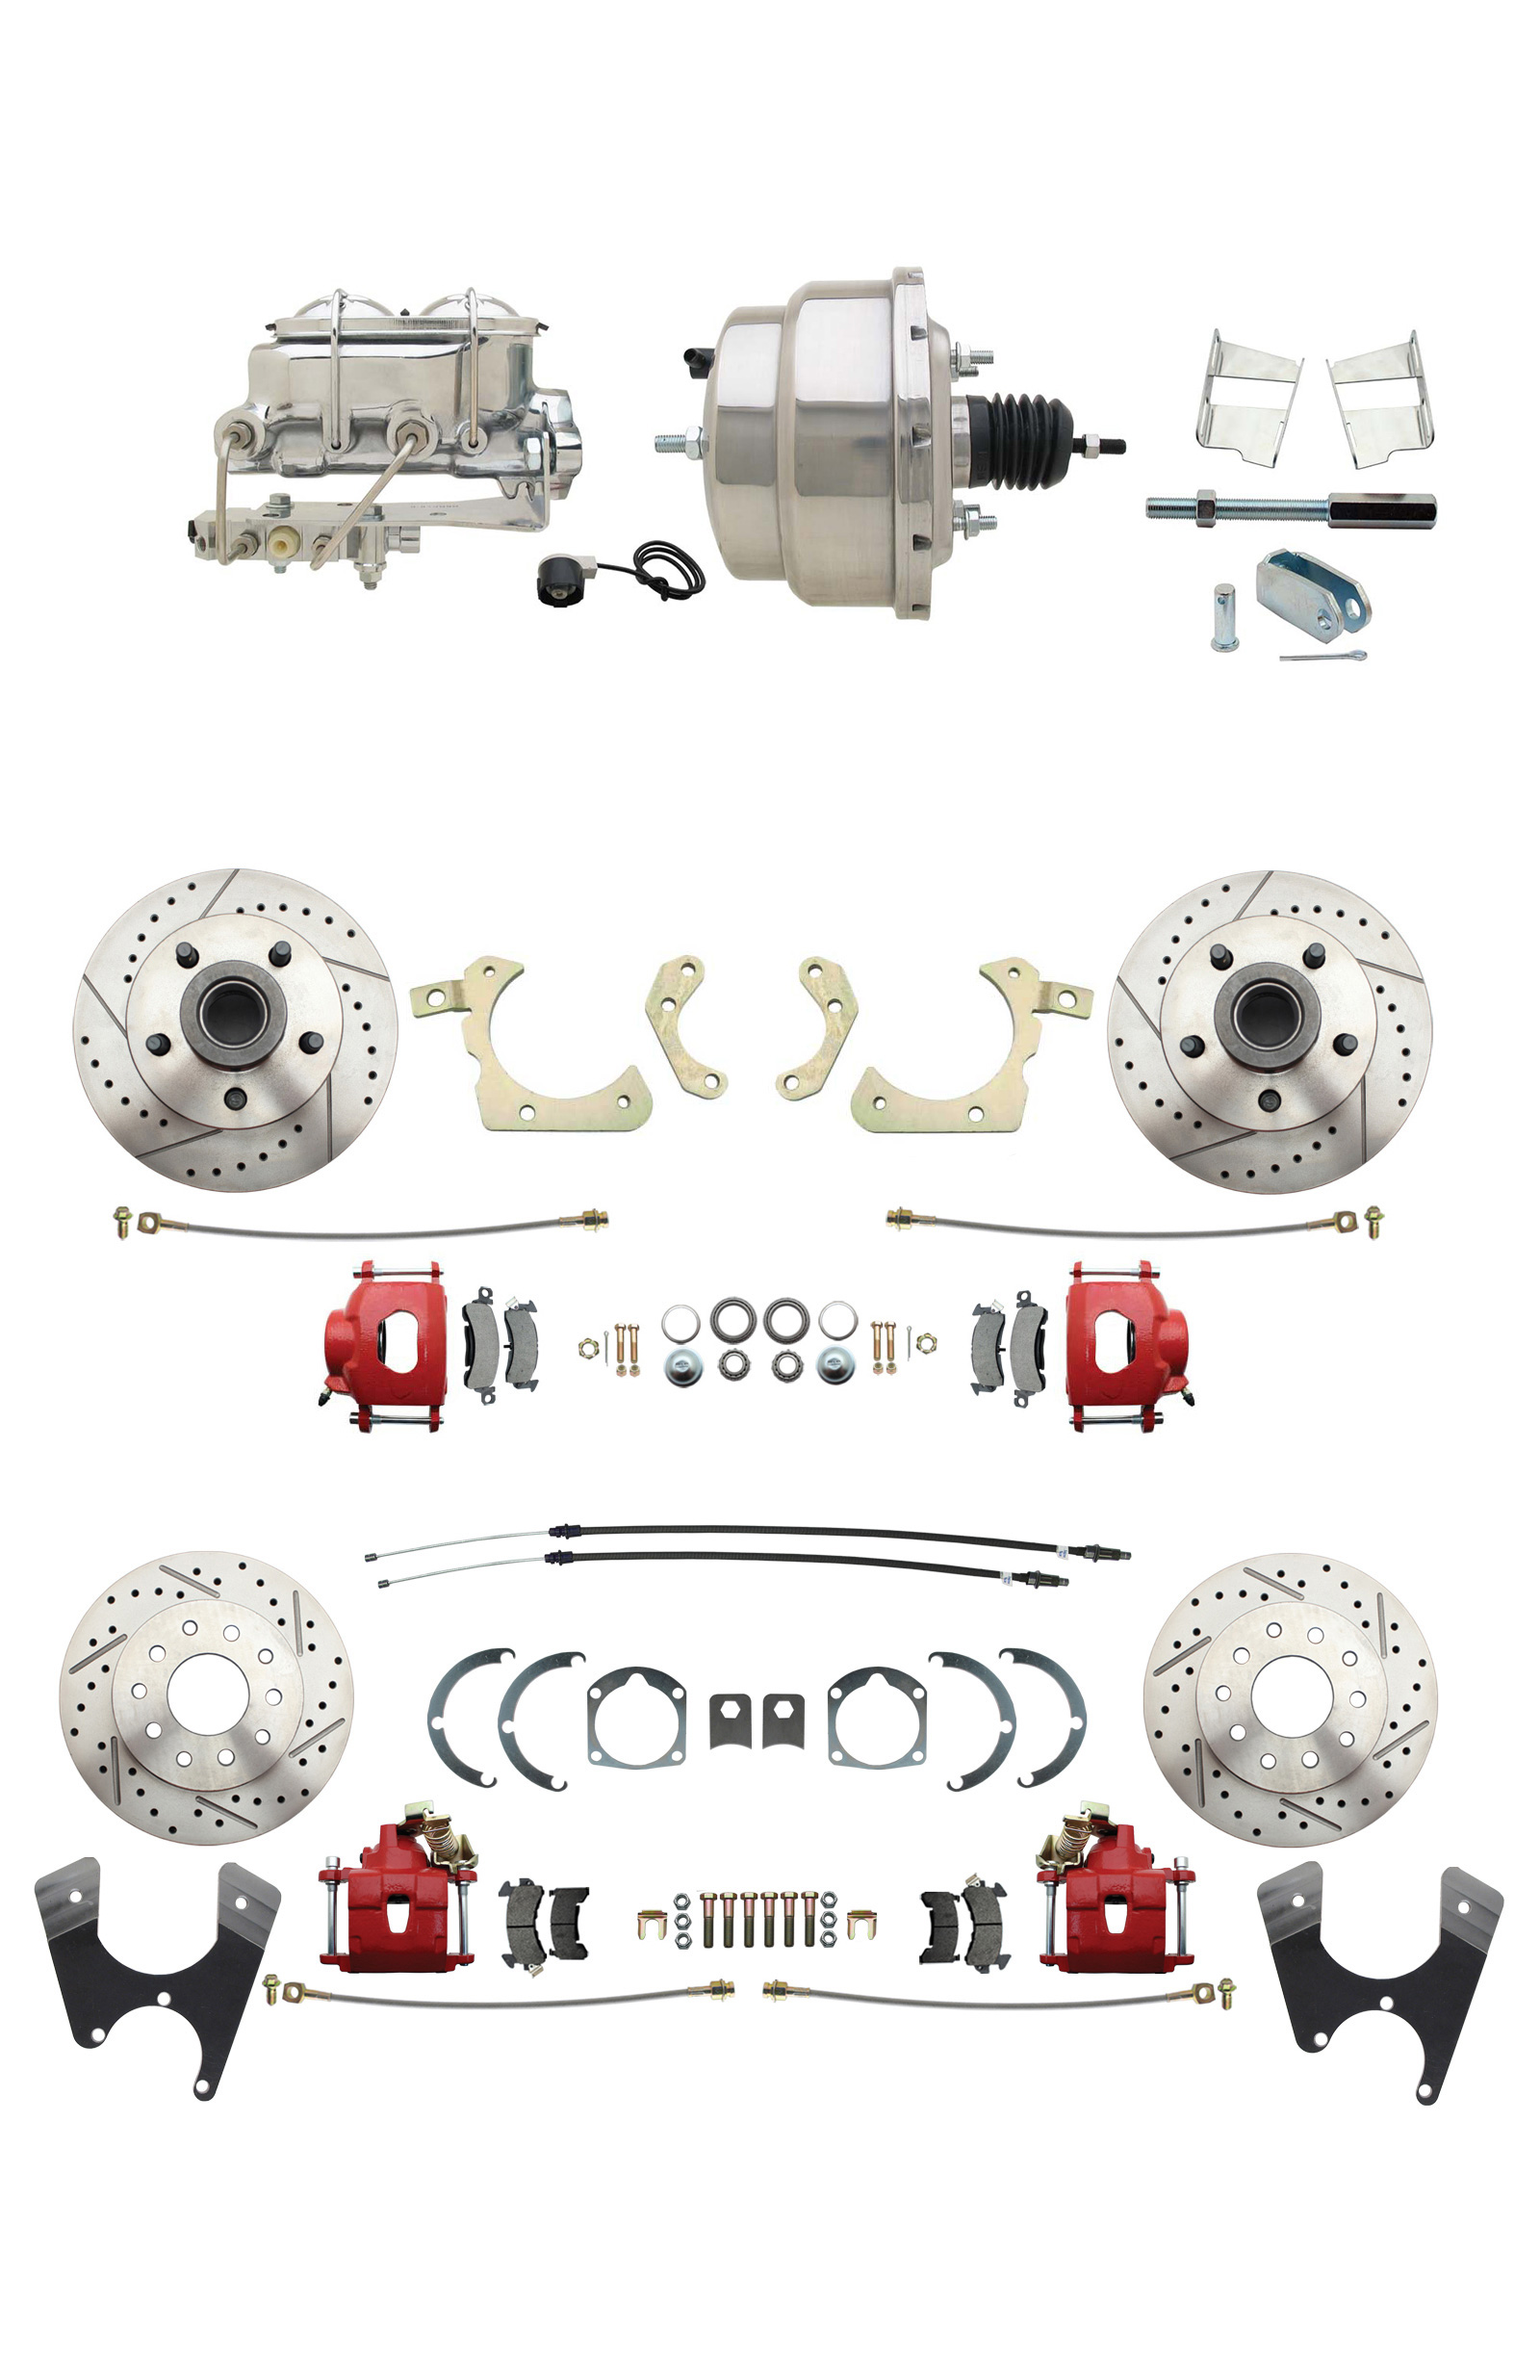 1959-1964 GM Full Size Front & Rear Power Disc Brake Kit Red Powder Coated Calipers Drilled/Slotted Rotors (Impala, Bel Air, Biscayne) & 8 Dual Stainless Steel Conversion Kit W/ Chrome Master Cylinder Bottom Mount Disc/